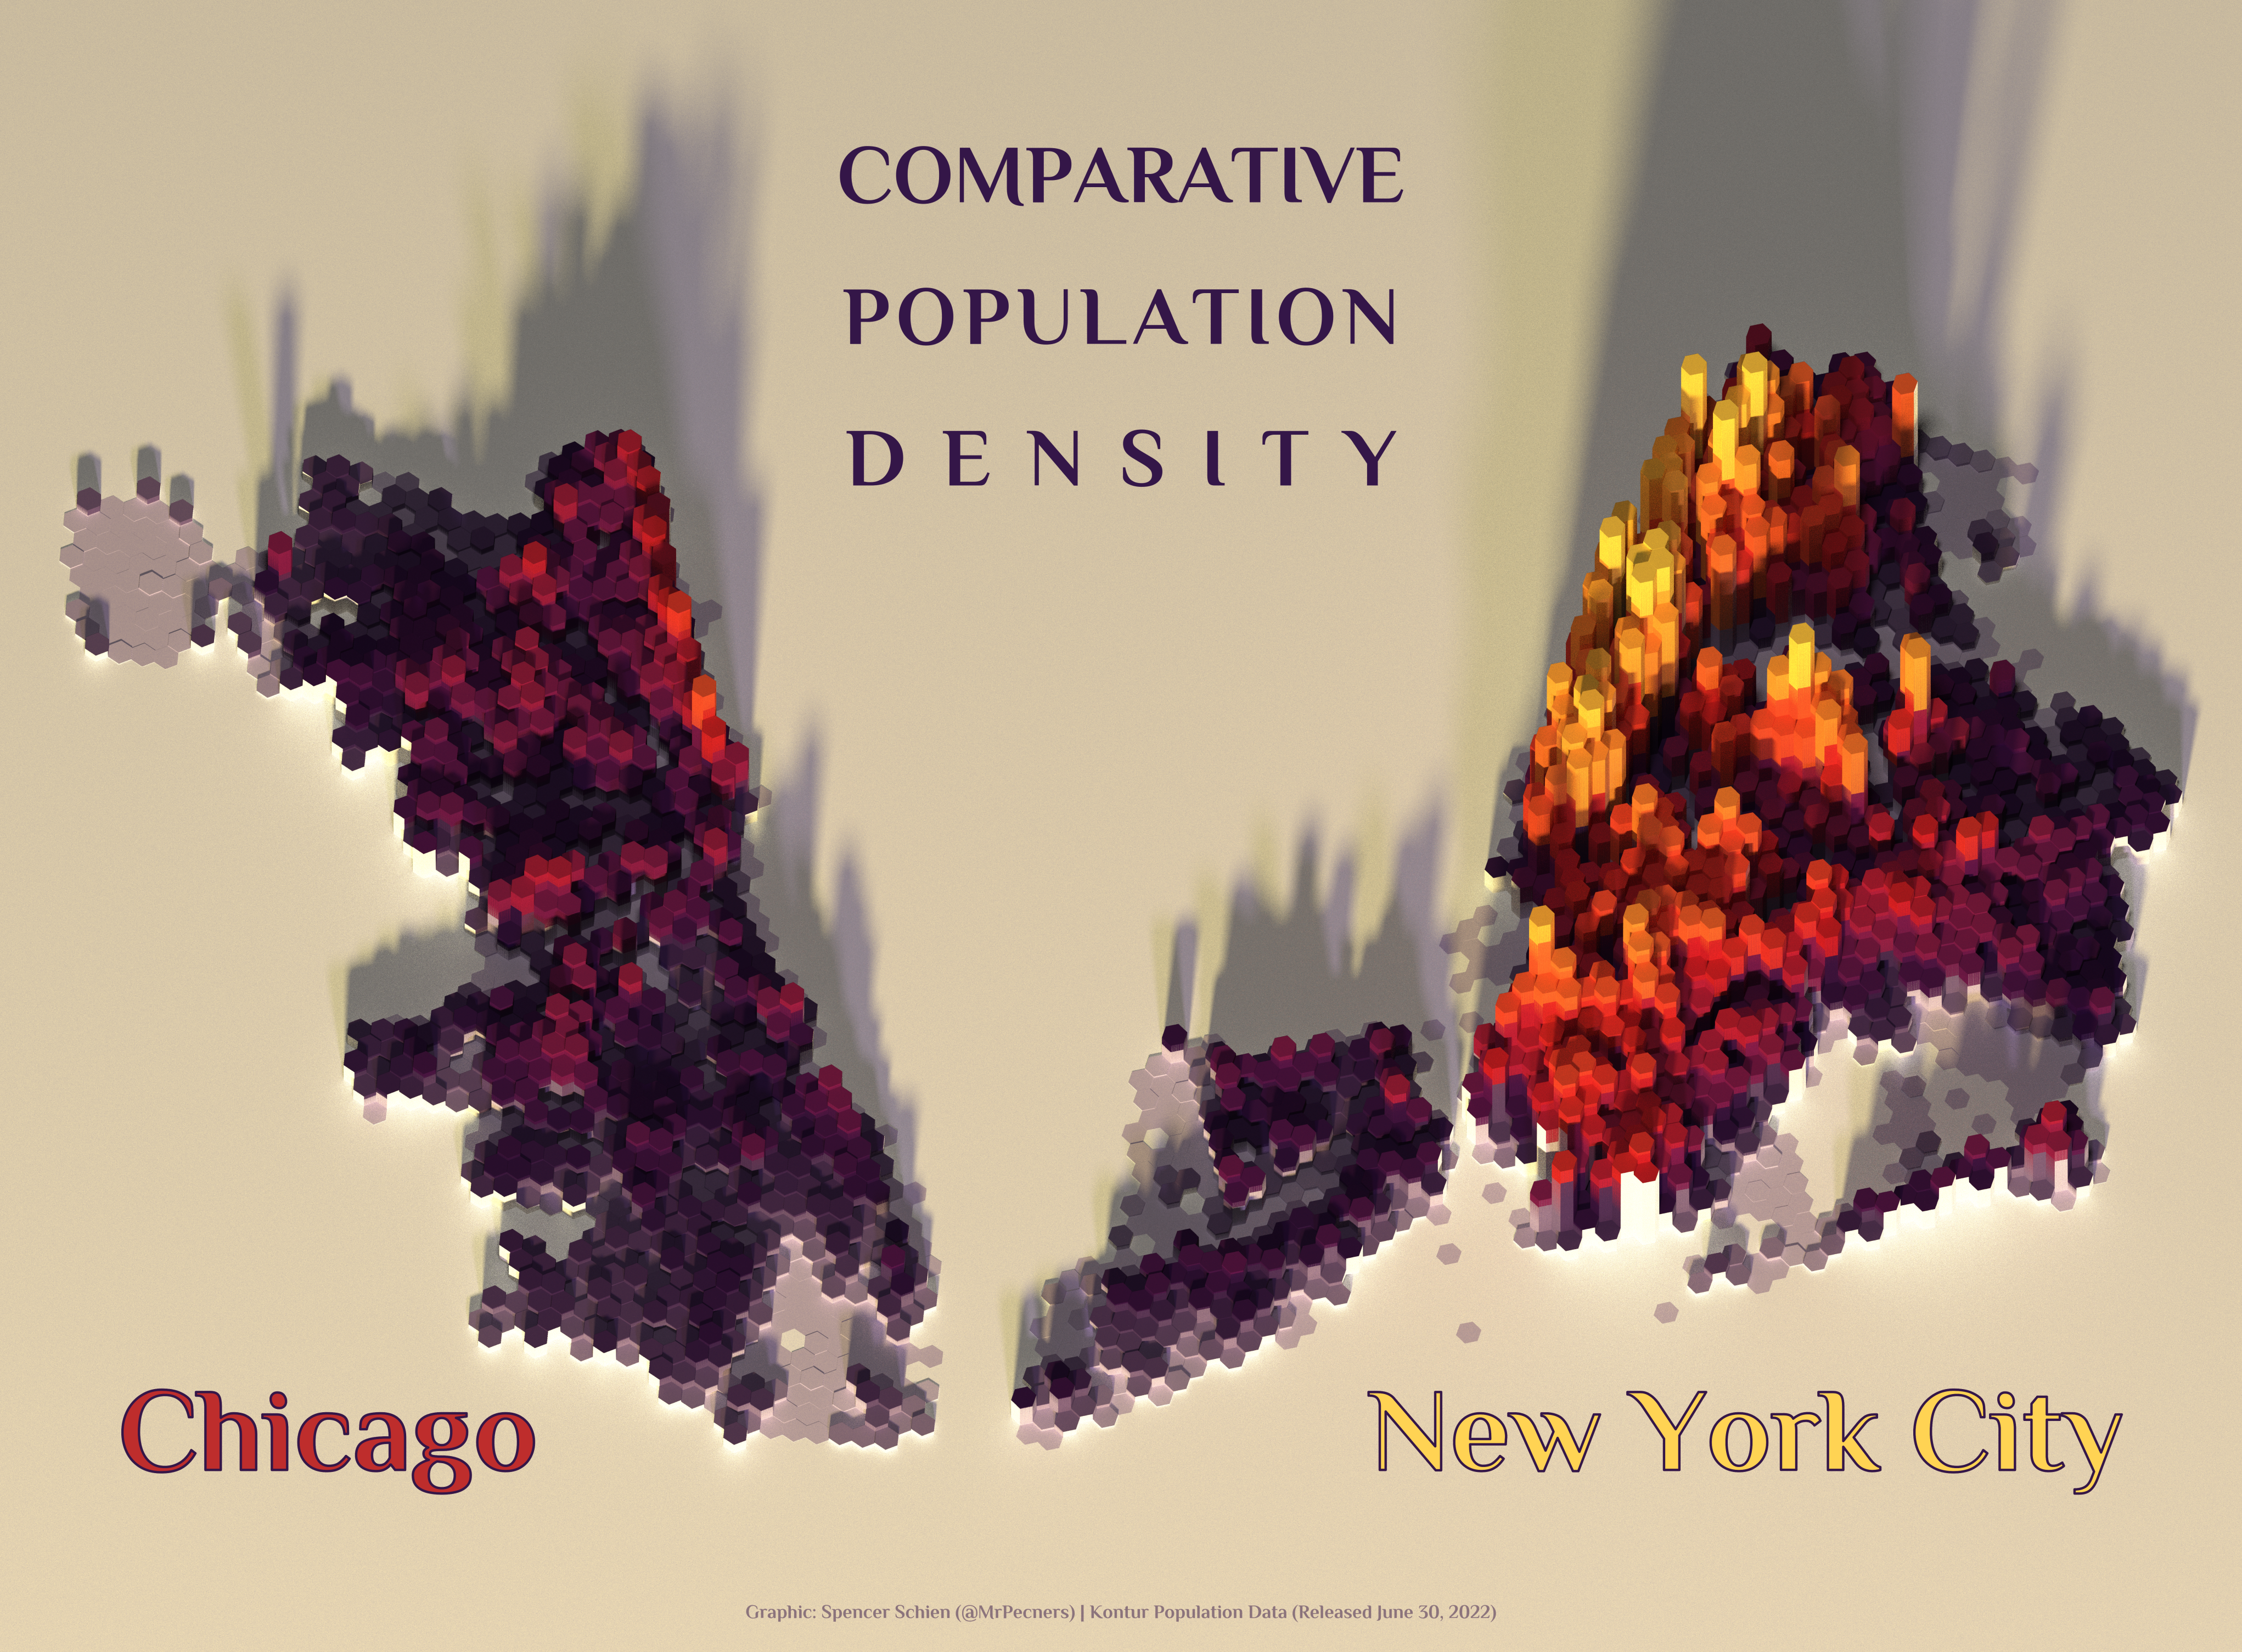 Comparative Population Density: Chicago and NYC